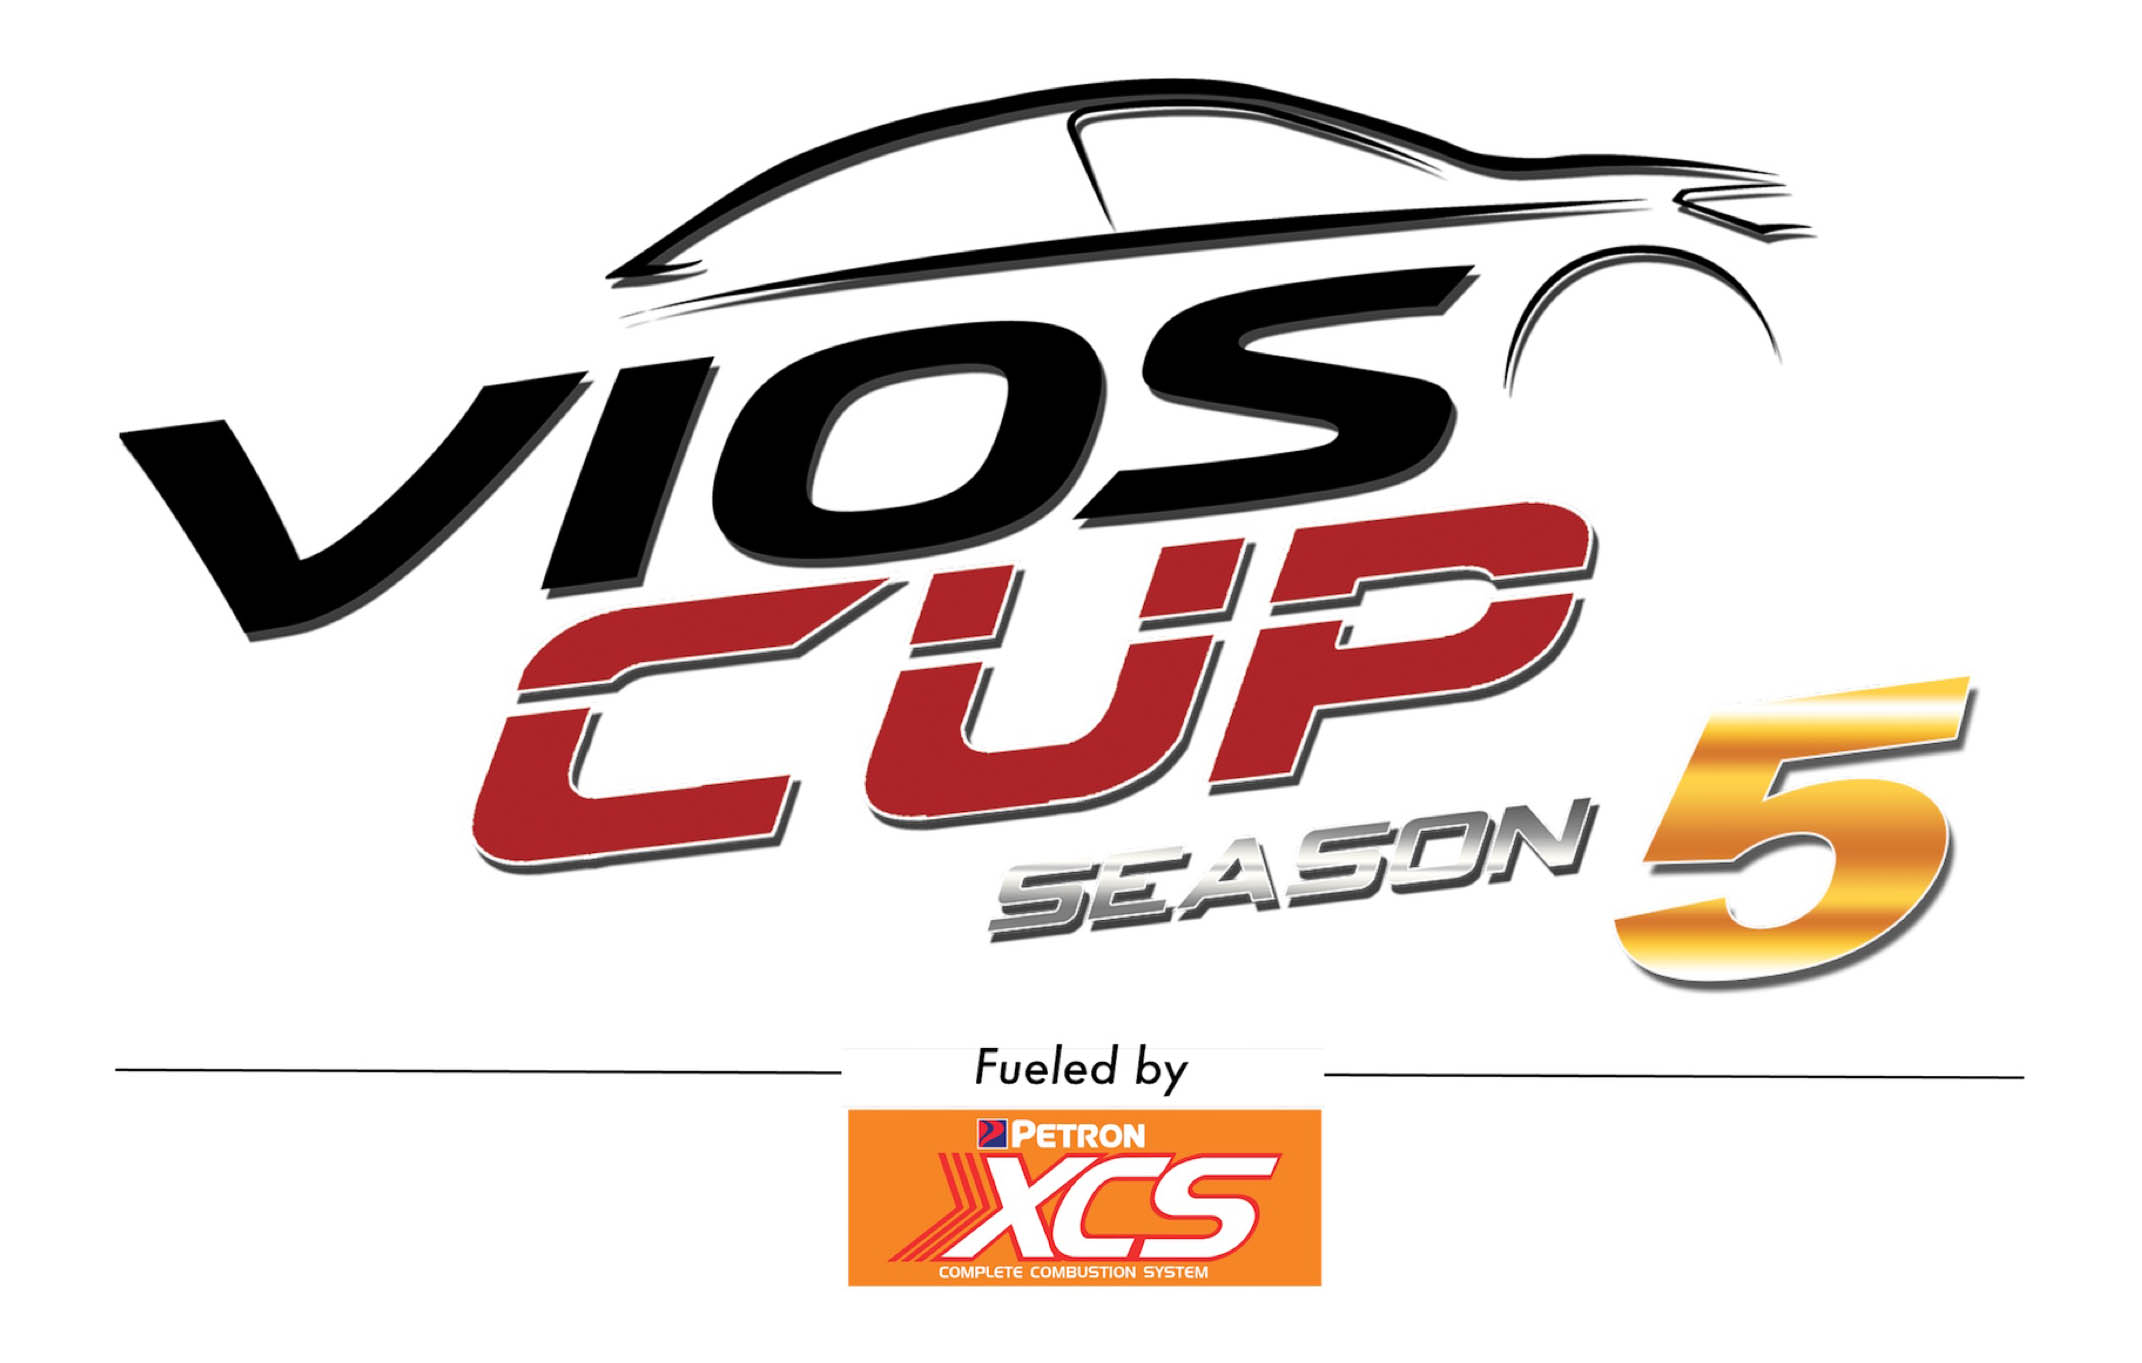 Petron XCS official fuel of the 2018 Vios Cup